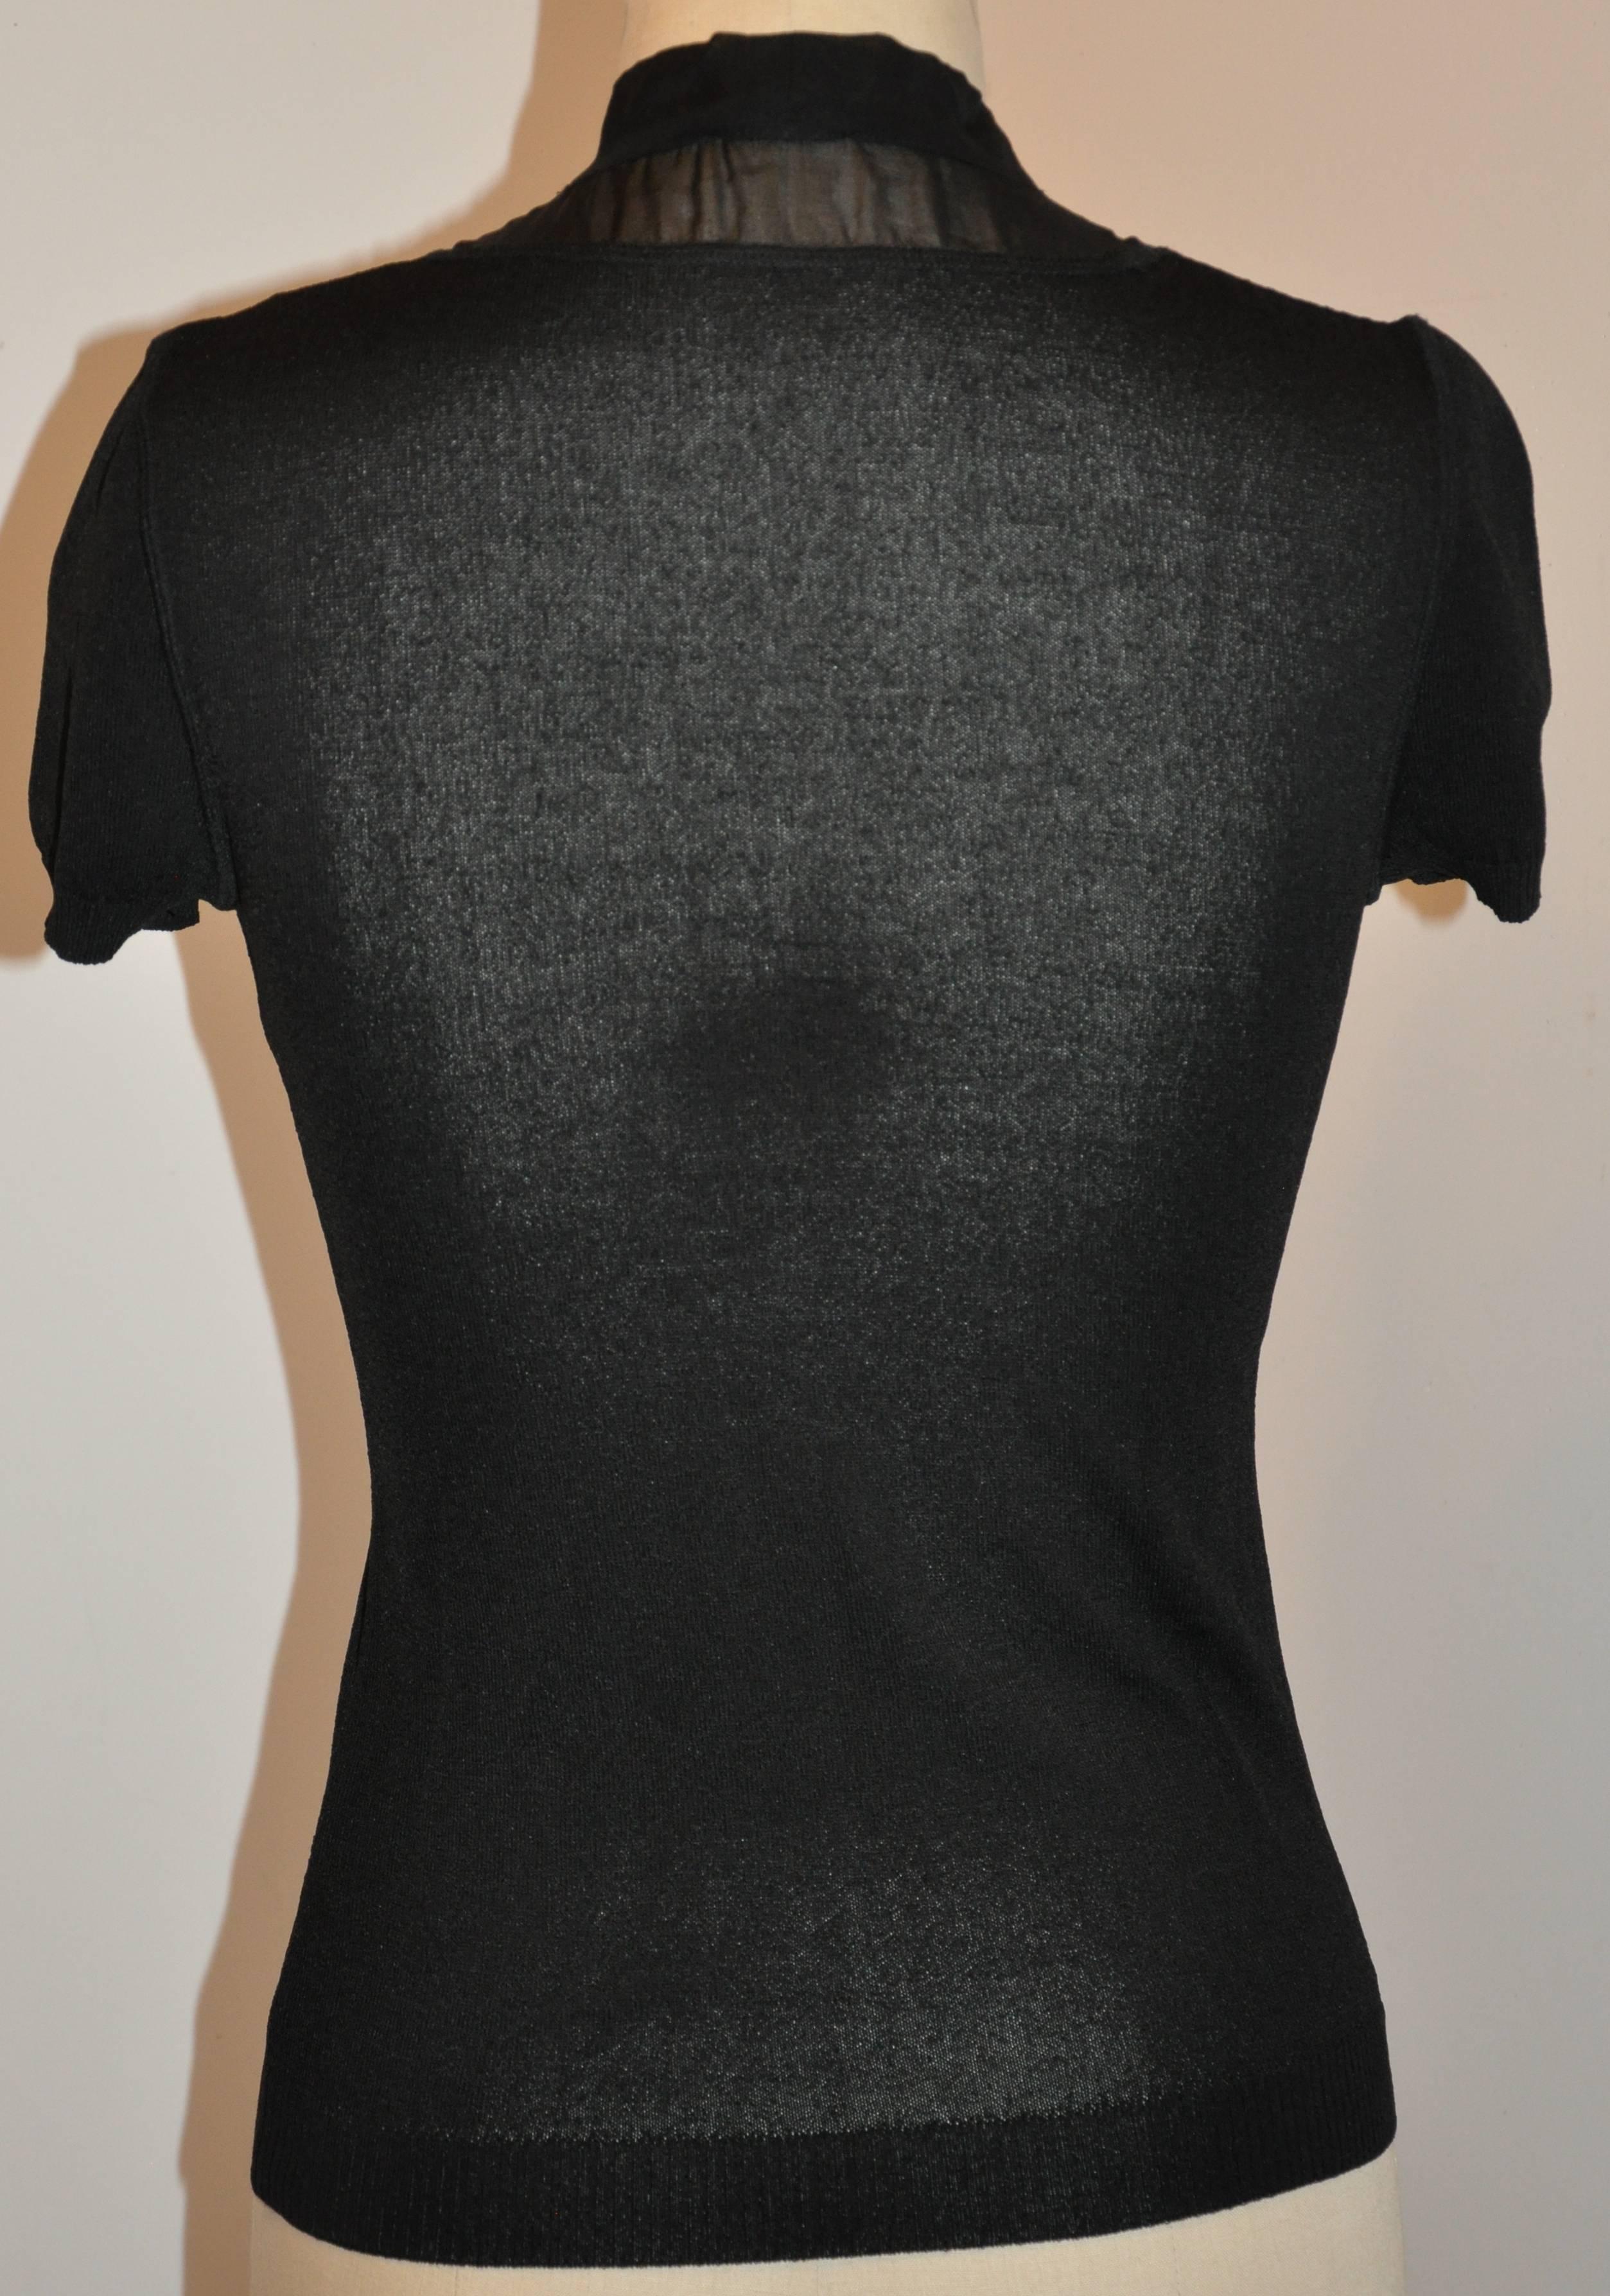        Valentino wonderful craftsmanship in this simply elegant black crew-neck pullover is accented with black silk chiffon open-neck tie collar which can be worn either open or closed and tied into a elegant bow in front.
       The front length